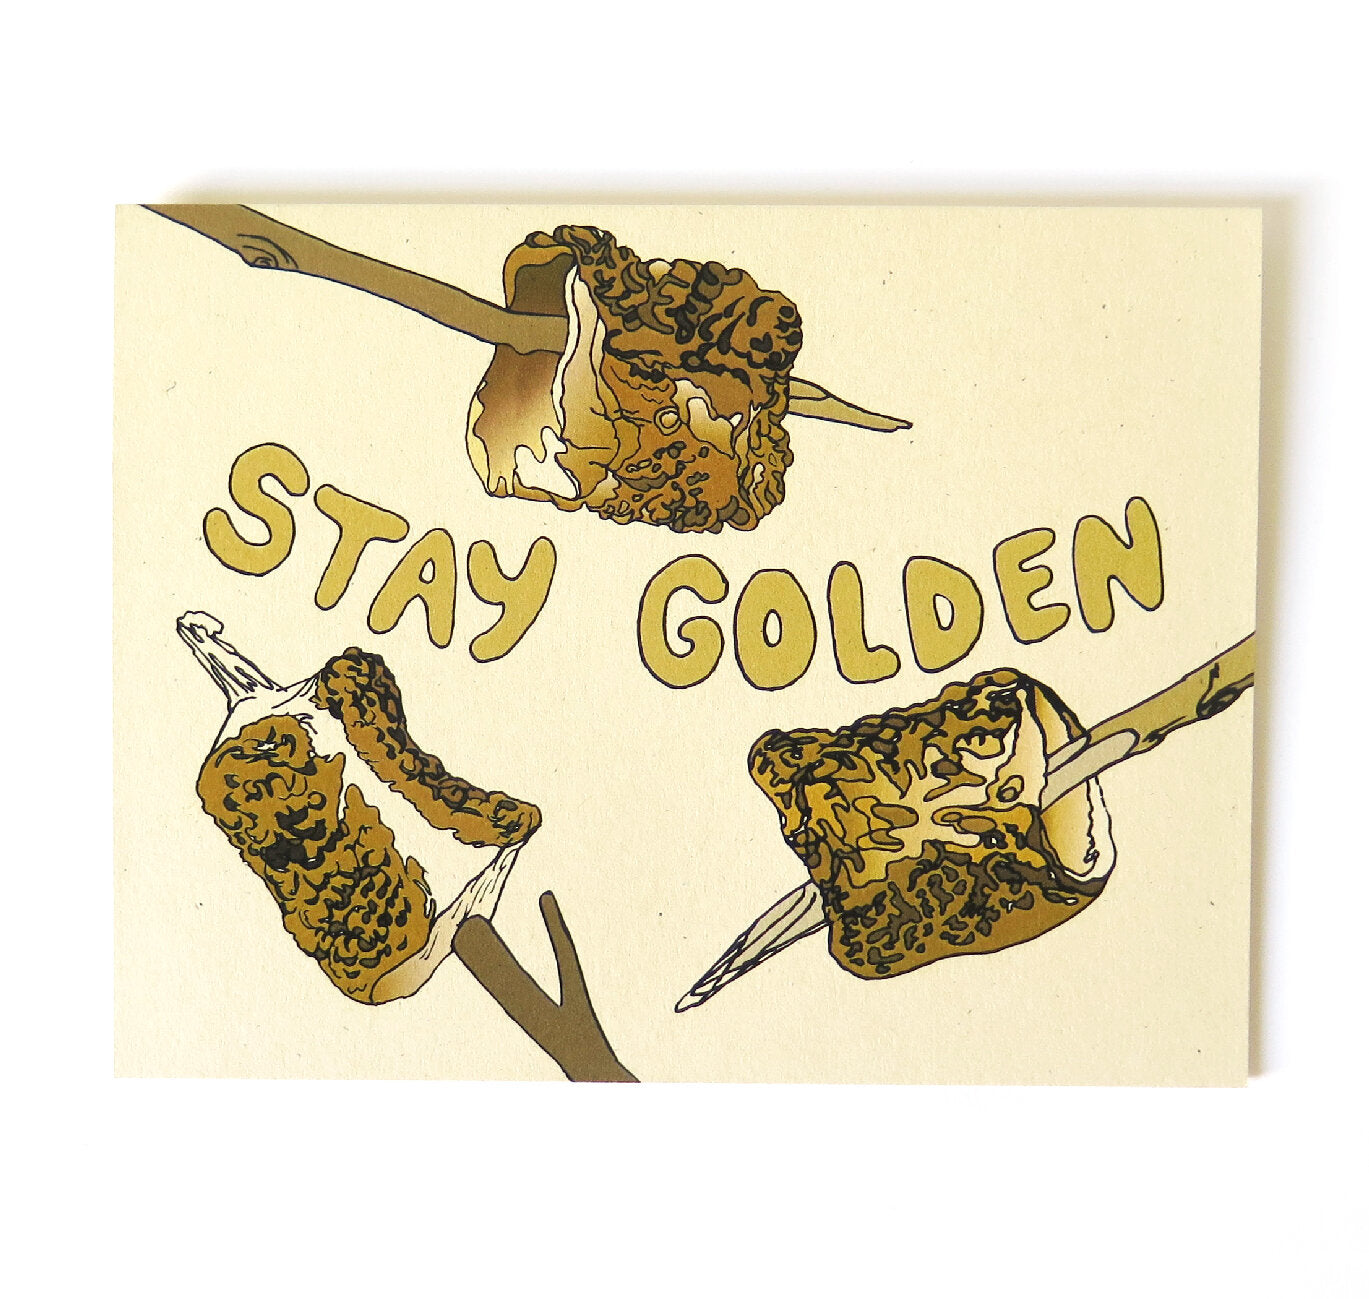 Stay Golden Card